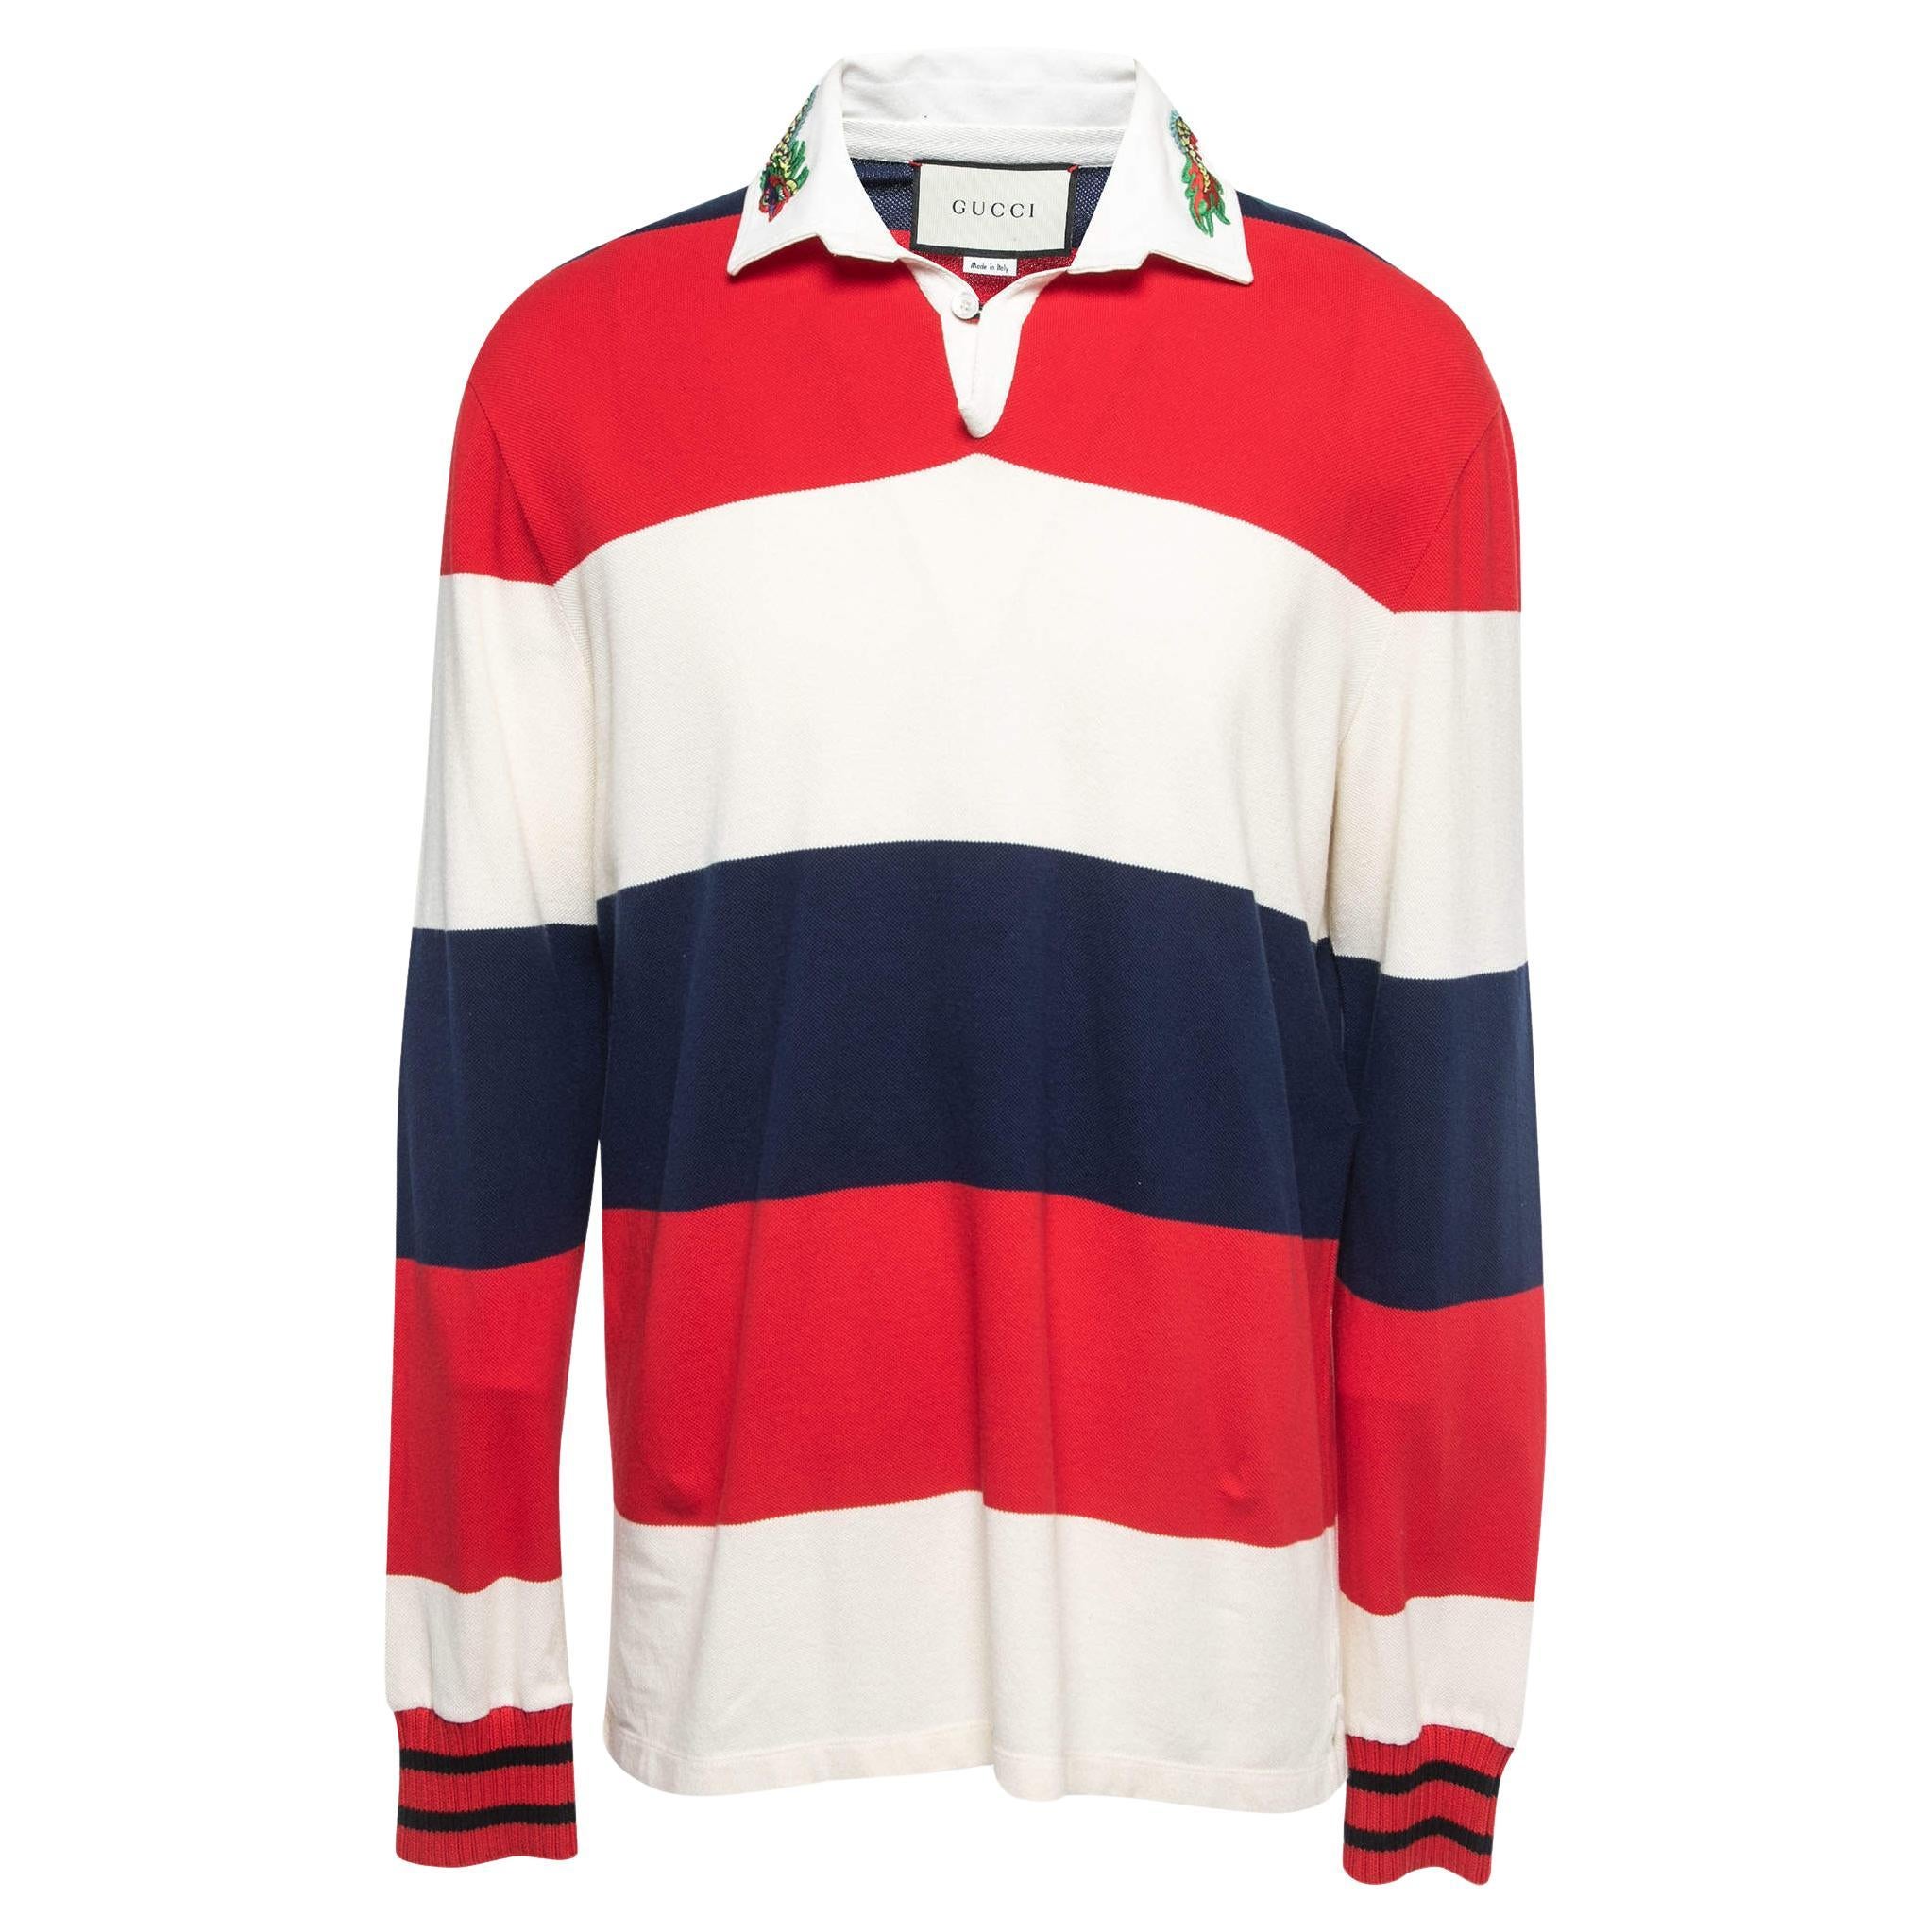 Gucci Multicolor Striped Cotton Knit Contrast Collar Detail Long Sleeve t-Shirt 